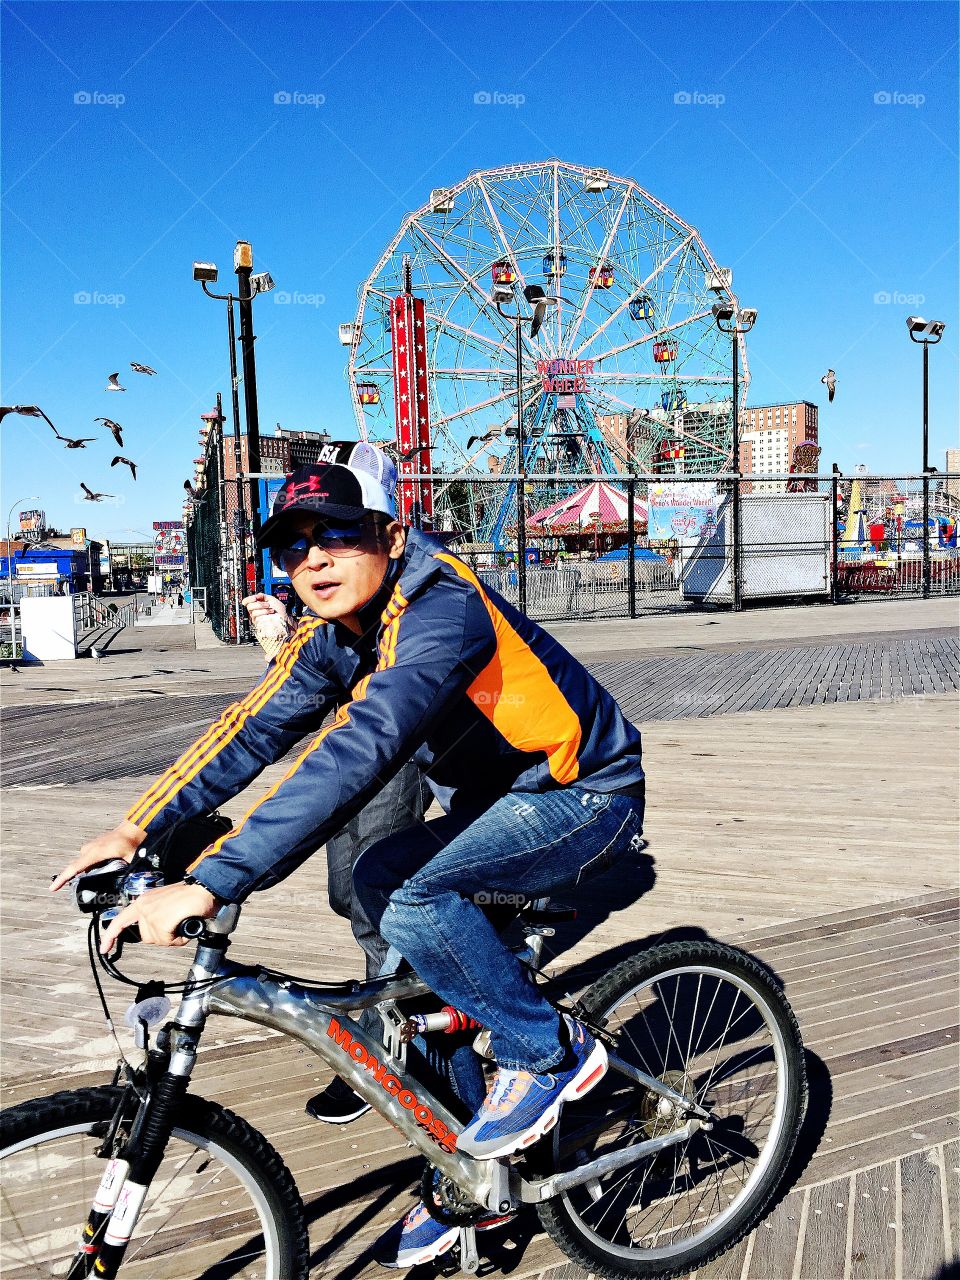 Cyclist pedal in front a amusement park in a blue sky day